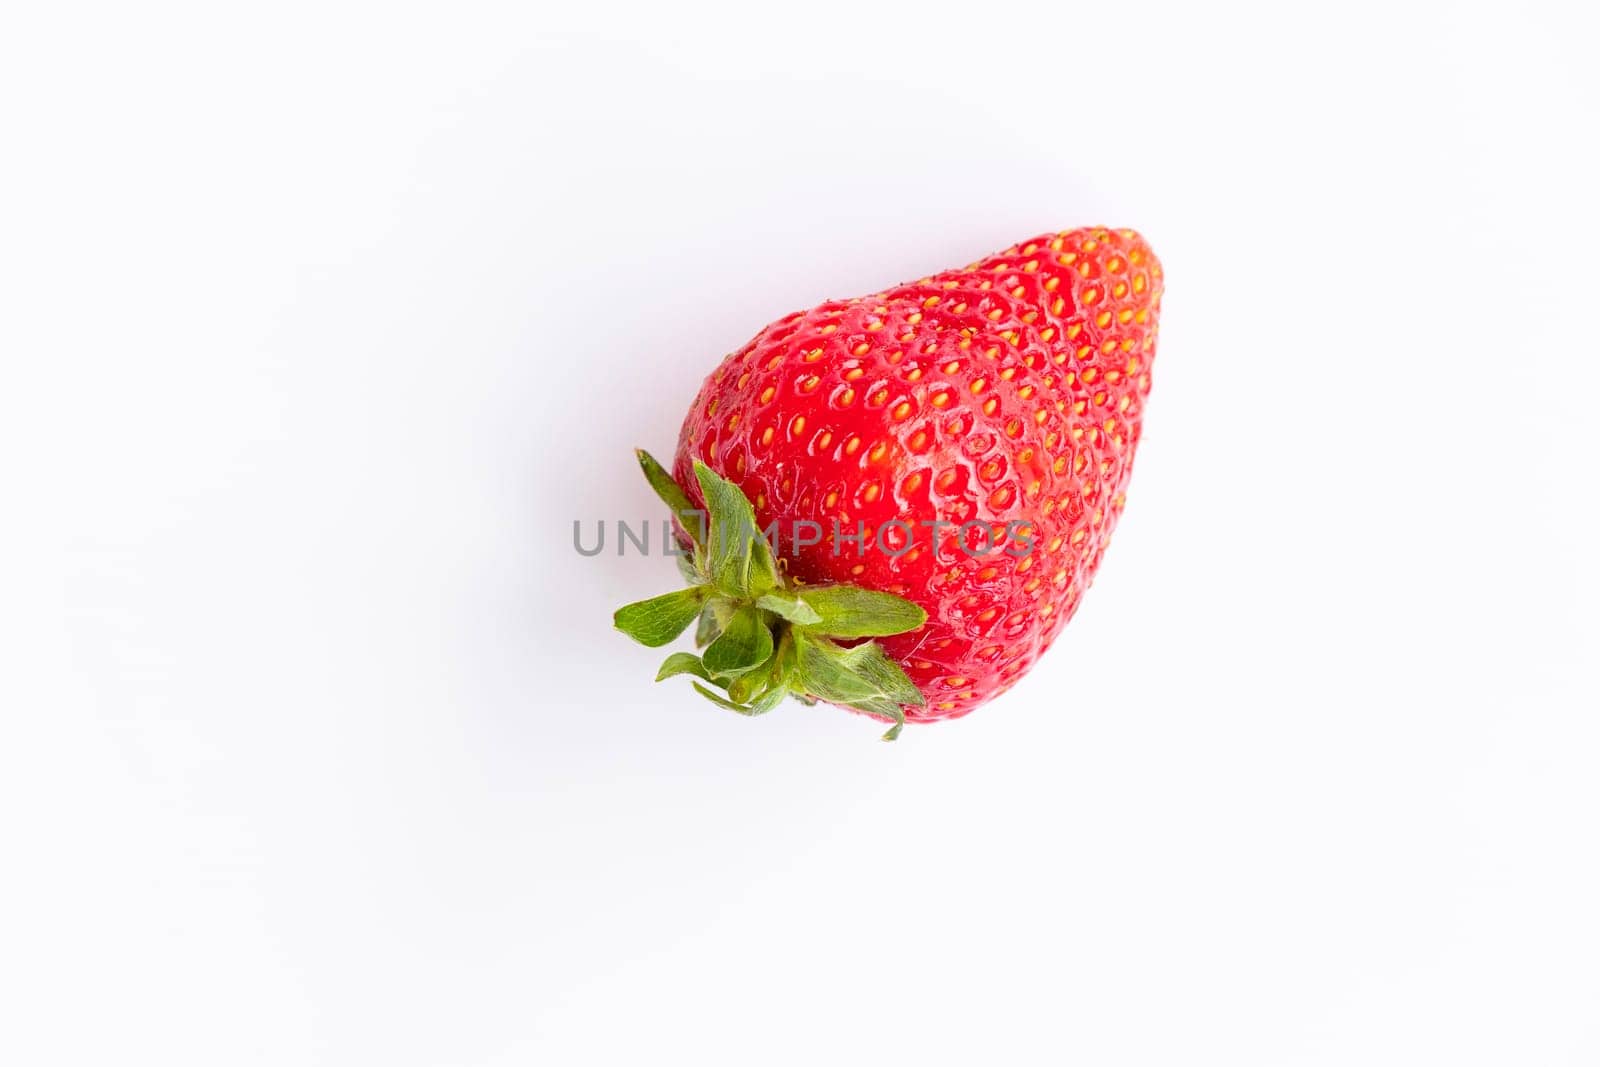 top view of red, ripe, juicy strawberries on a white background. by Leoschka